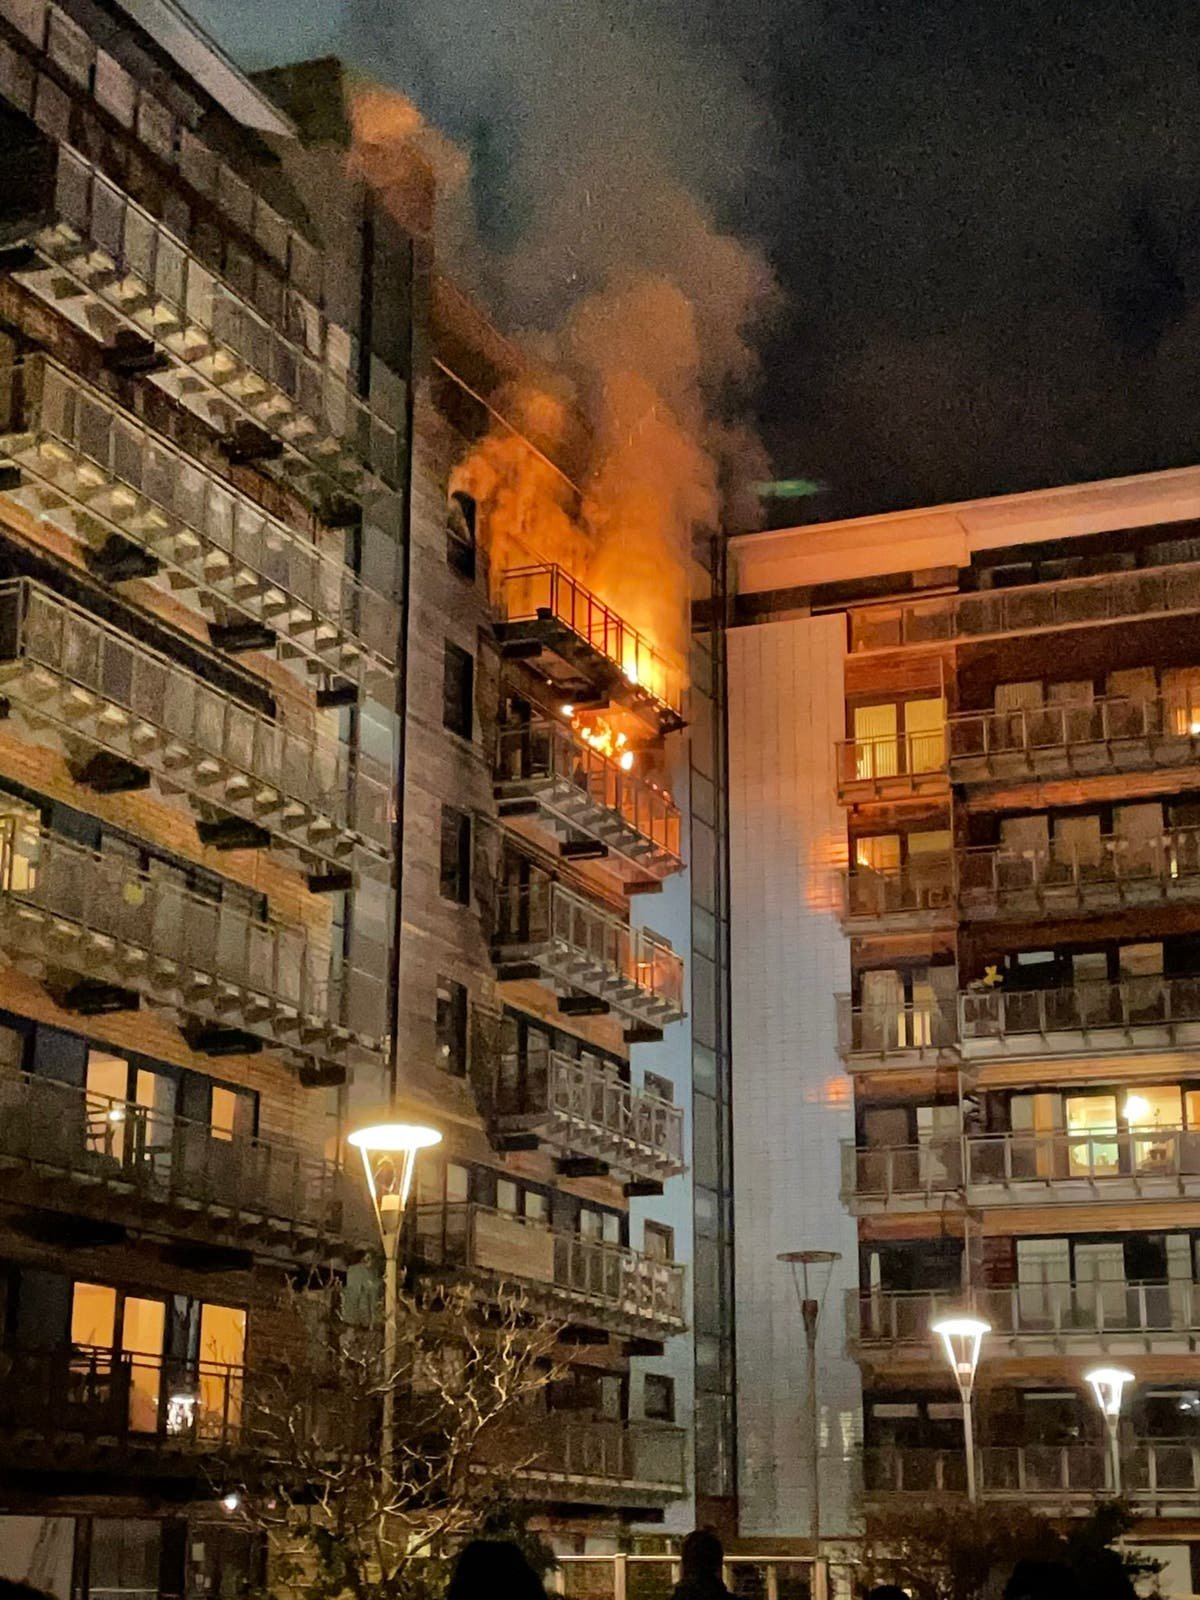 Edinburgh flat fire: Firefighters injured as apartments evacuated in early morning blaze